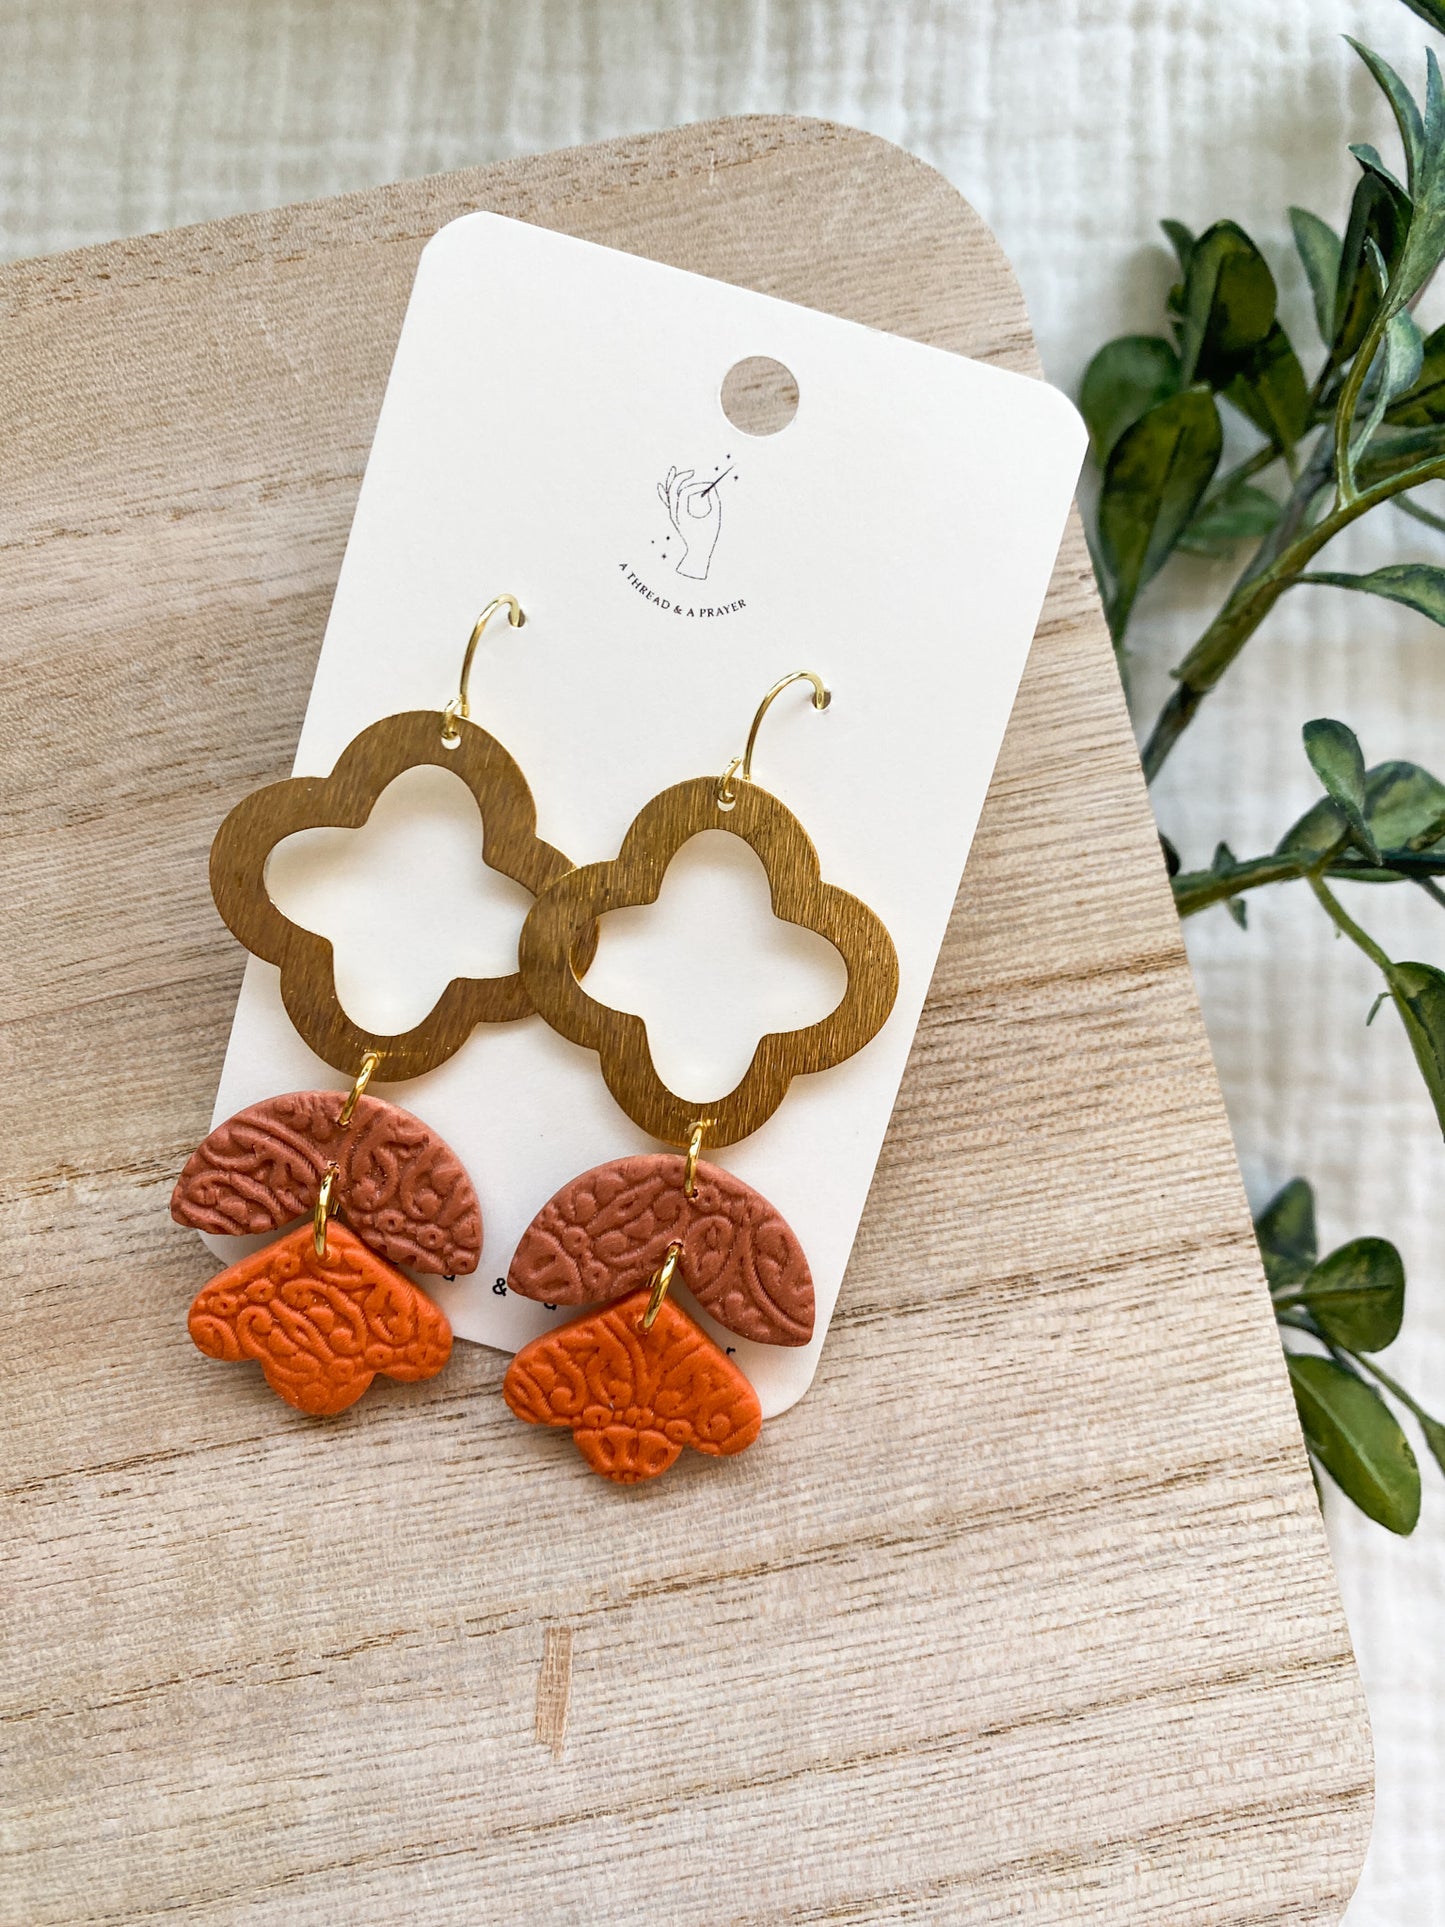 Flirty Orange Dreams Textured Clay and Brass Earrings  | Shades of Orange and Coral | Easy Spring Style | Everyday Wear  | Dramatic Earrings